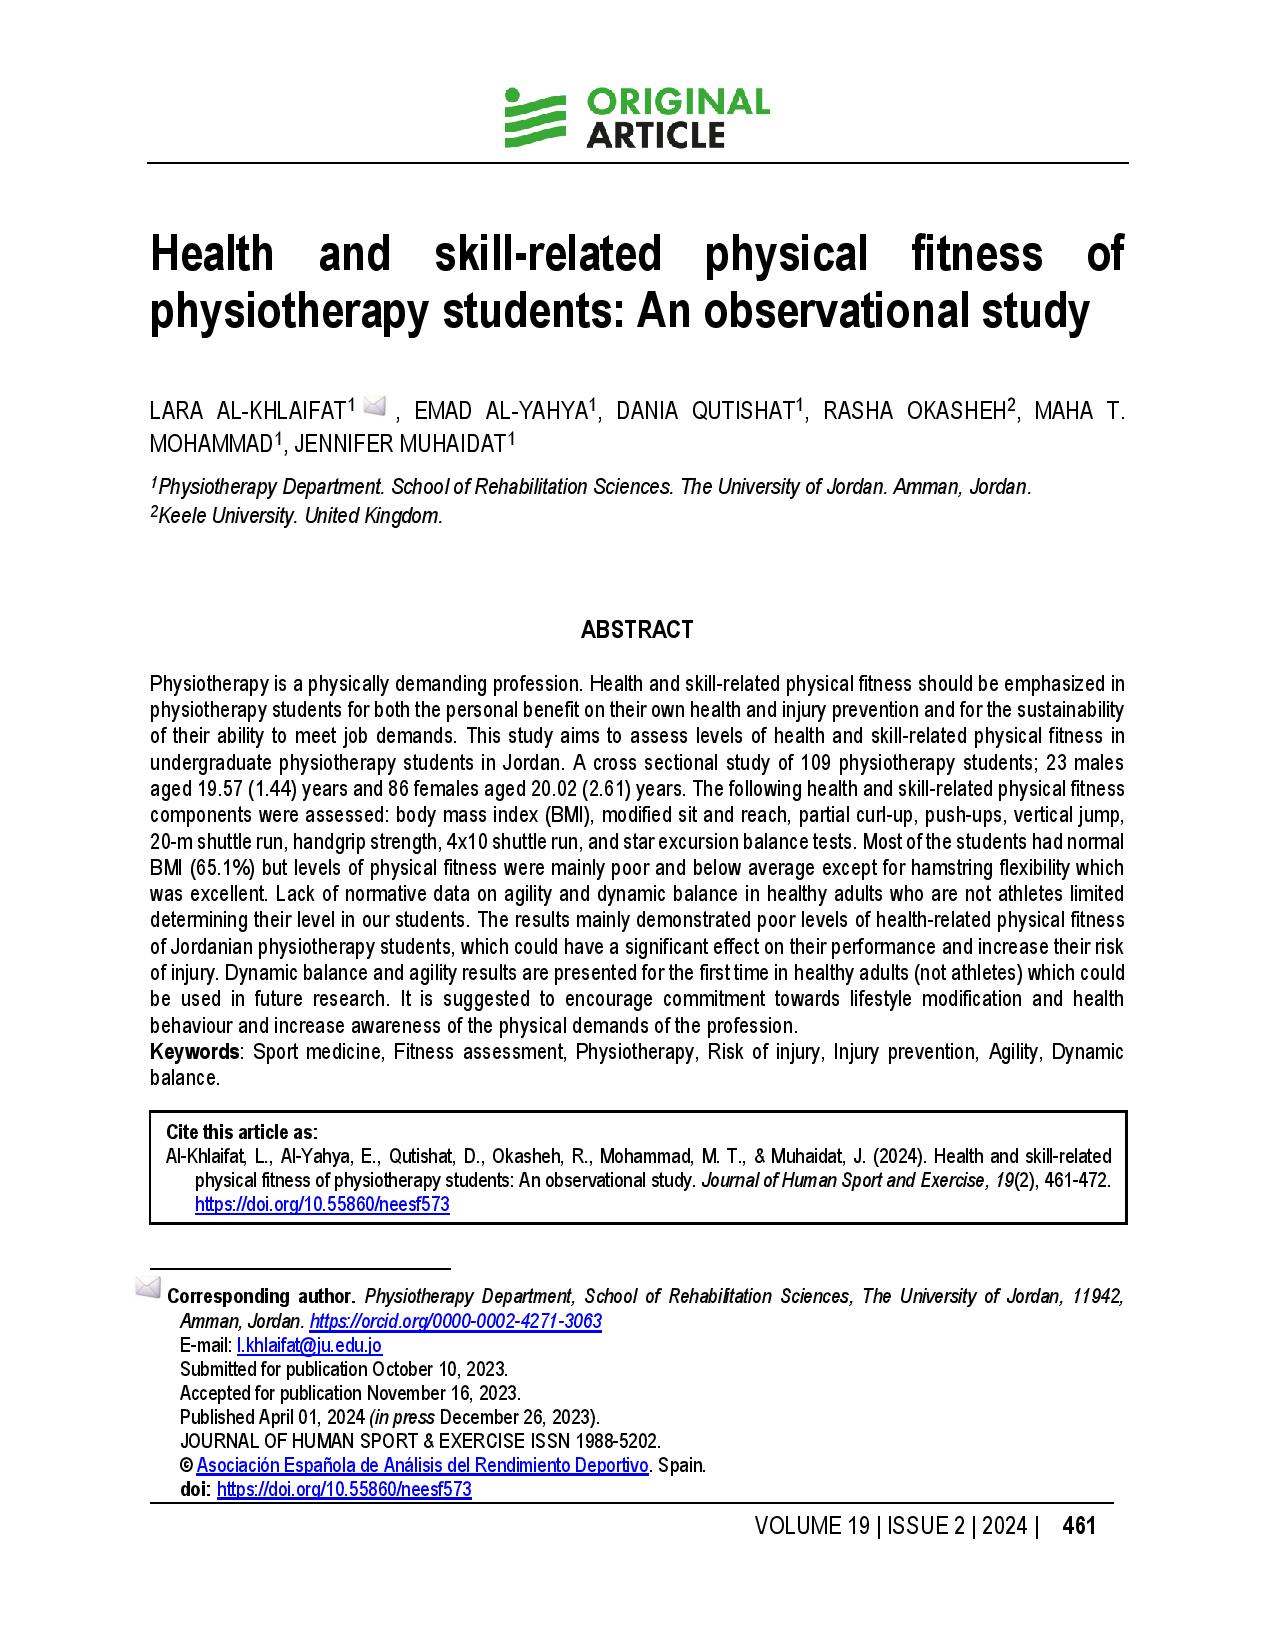 Health and skill-related physical fitness of physiotherapy students: An observational study